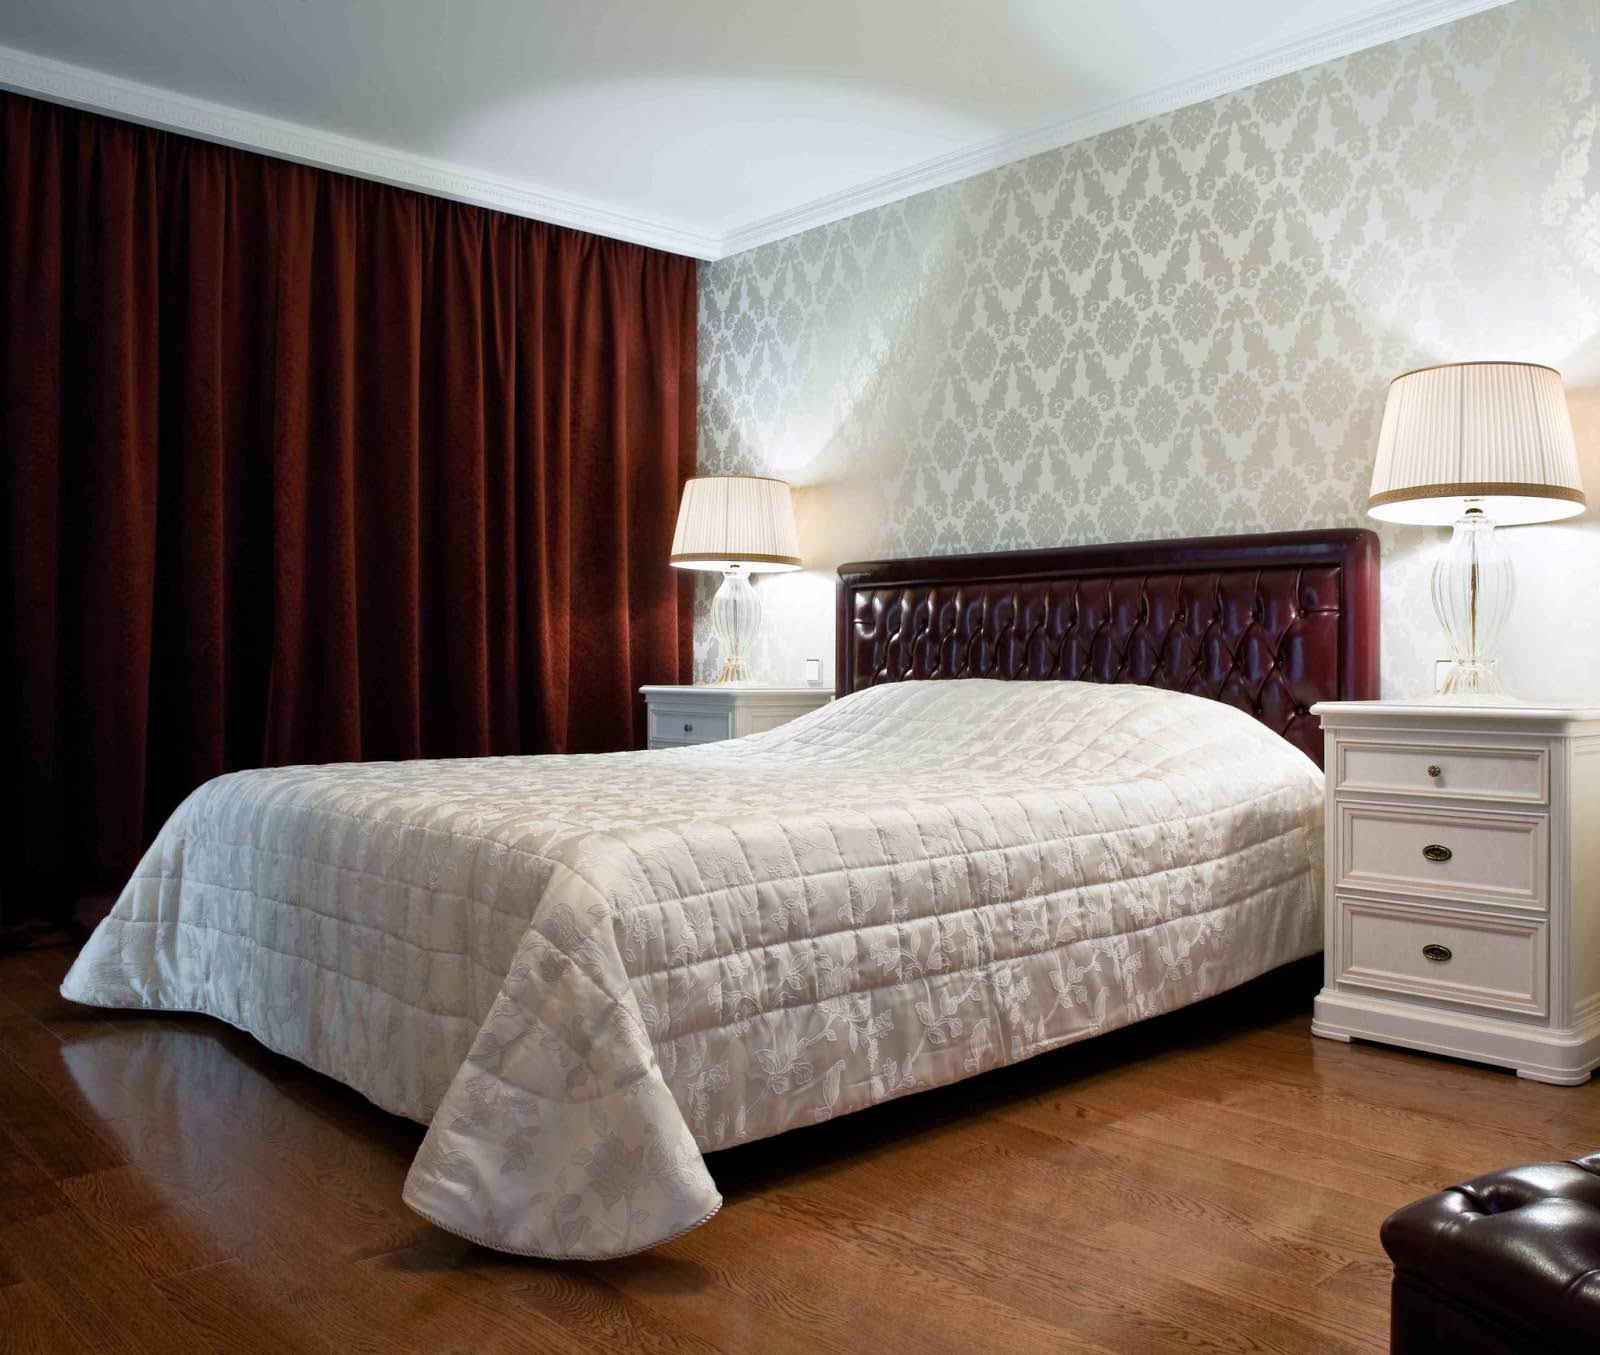 burgundy curtains in bedroom design with gray wallpaper